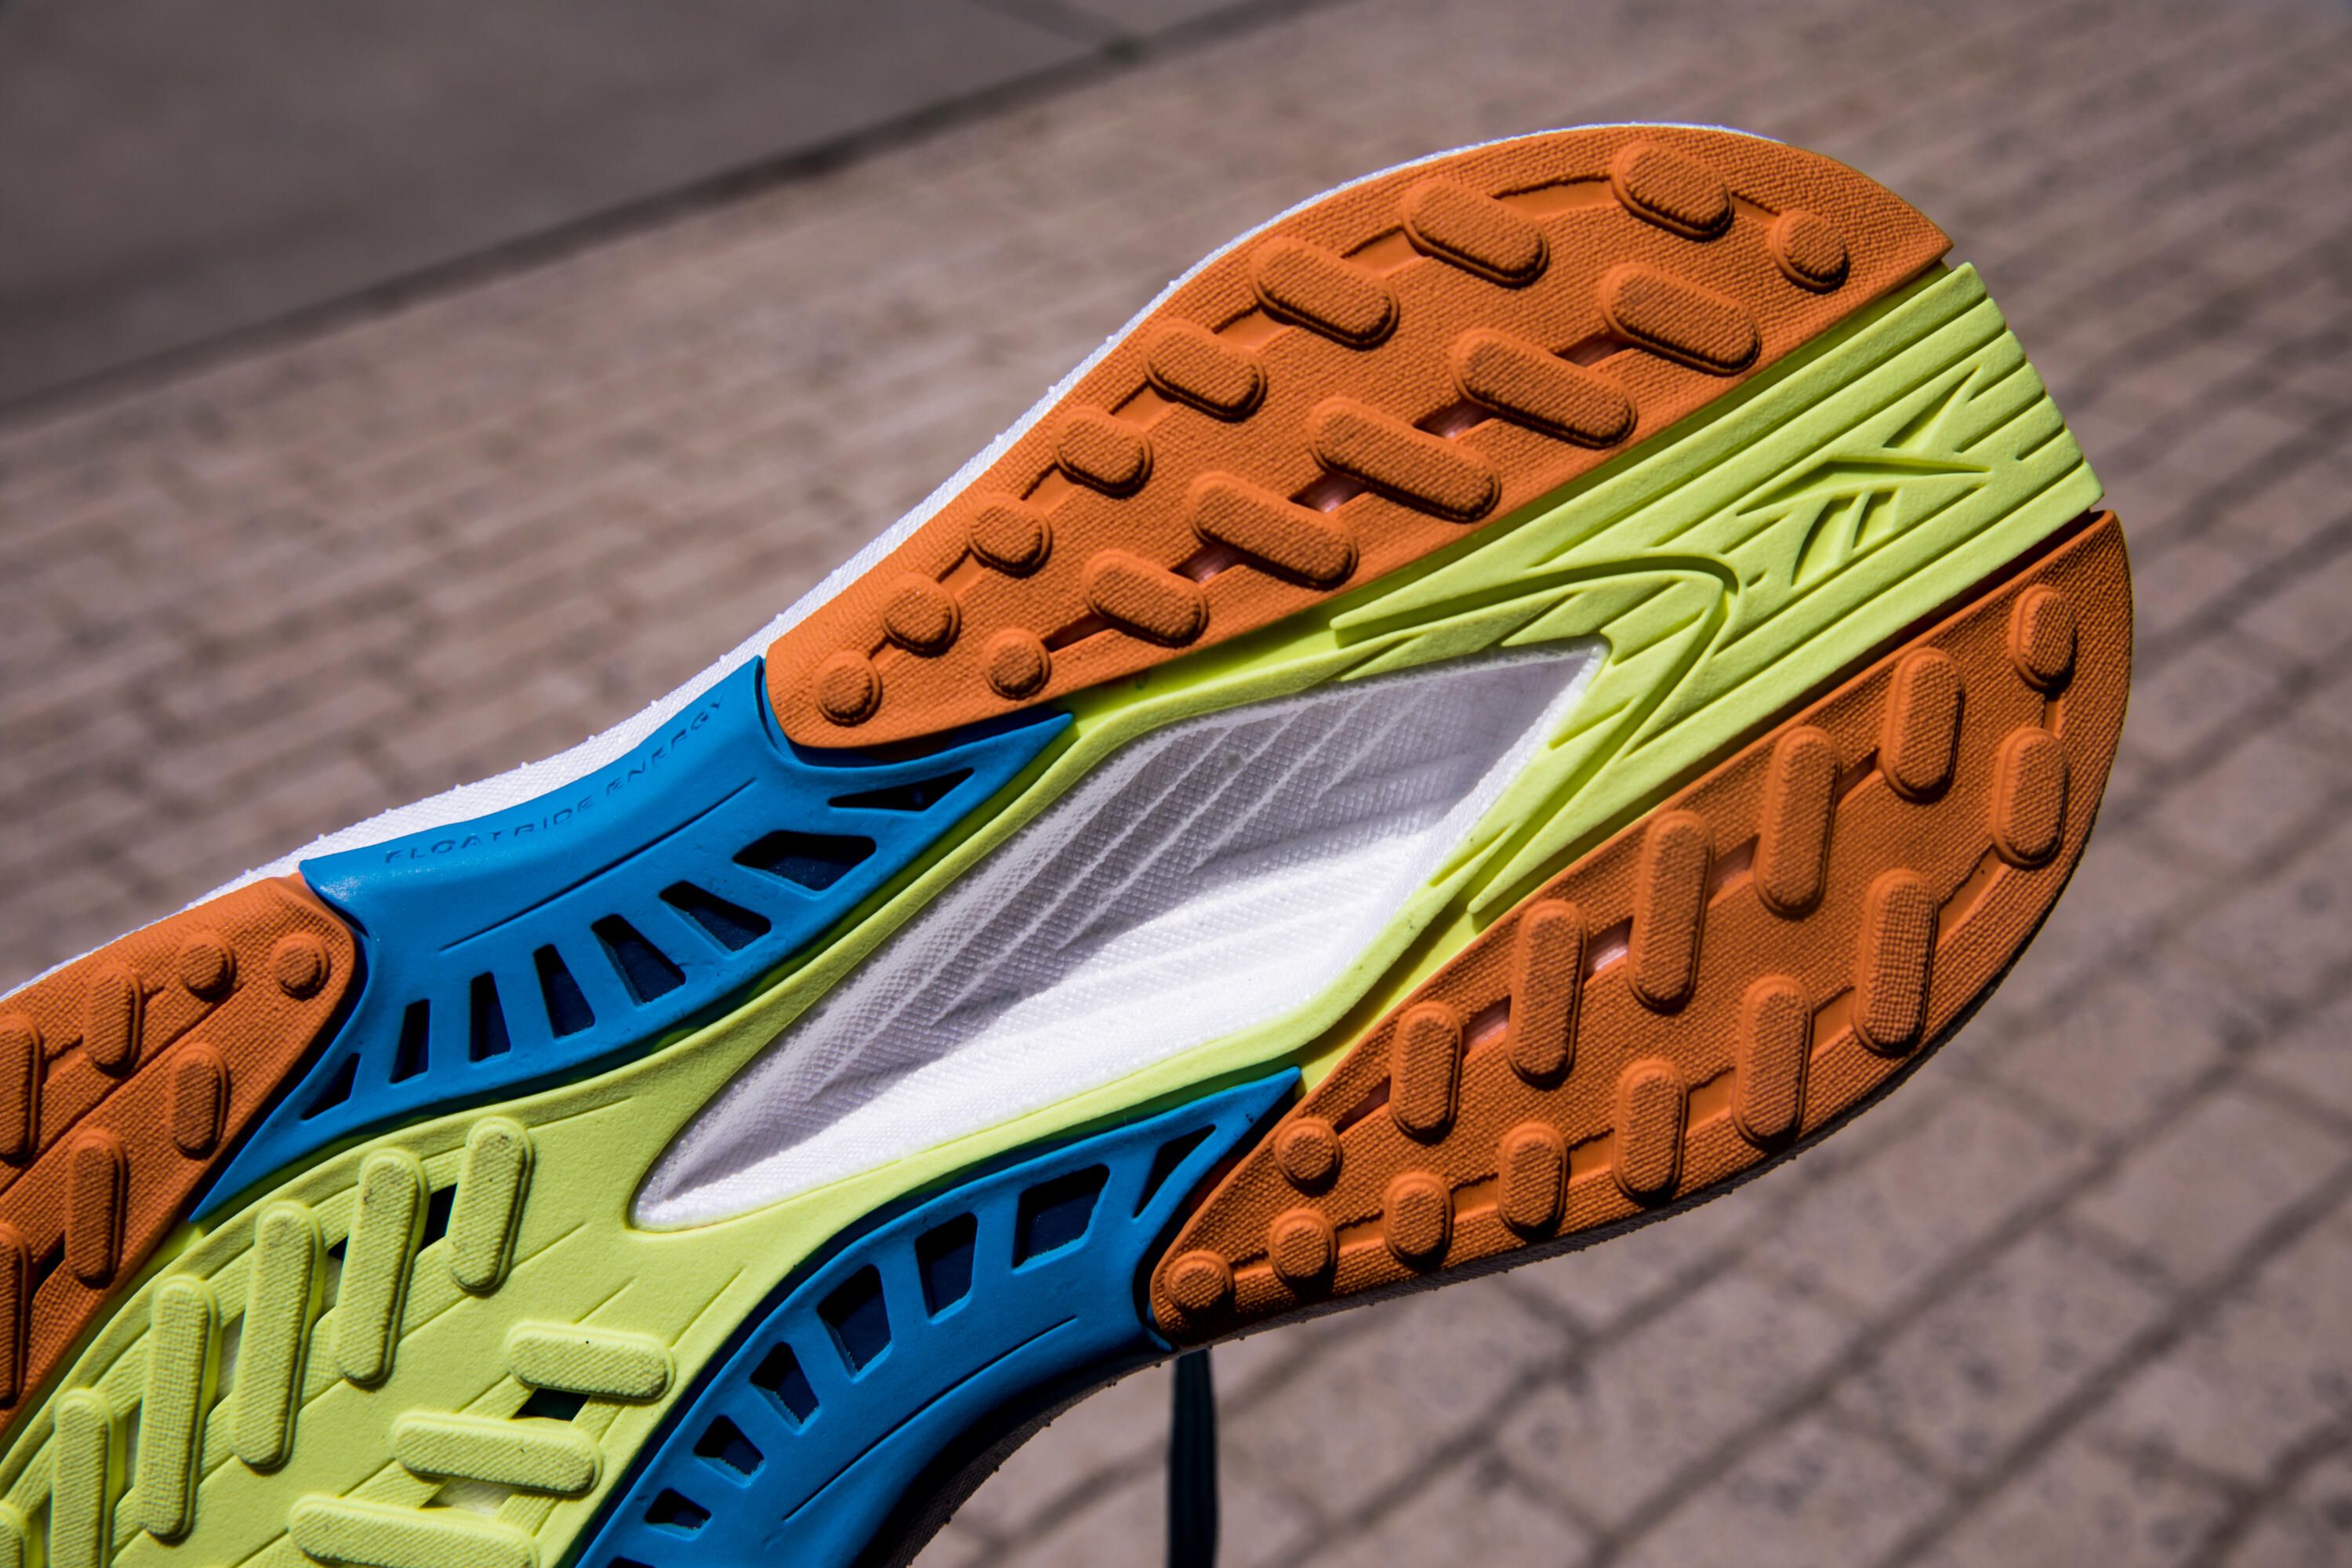 Tested and Reviewed: Reebok Floatride Energy 5